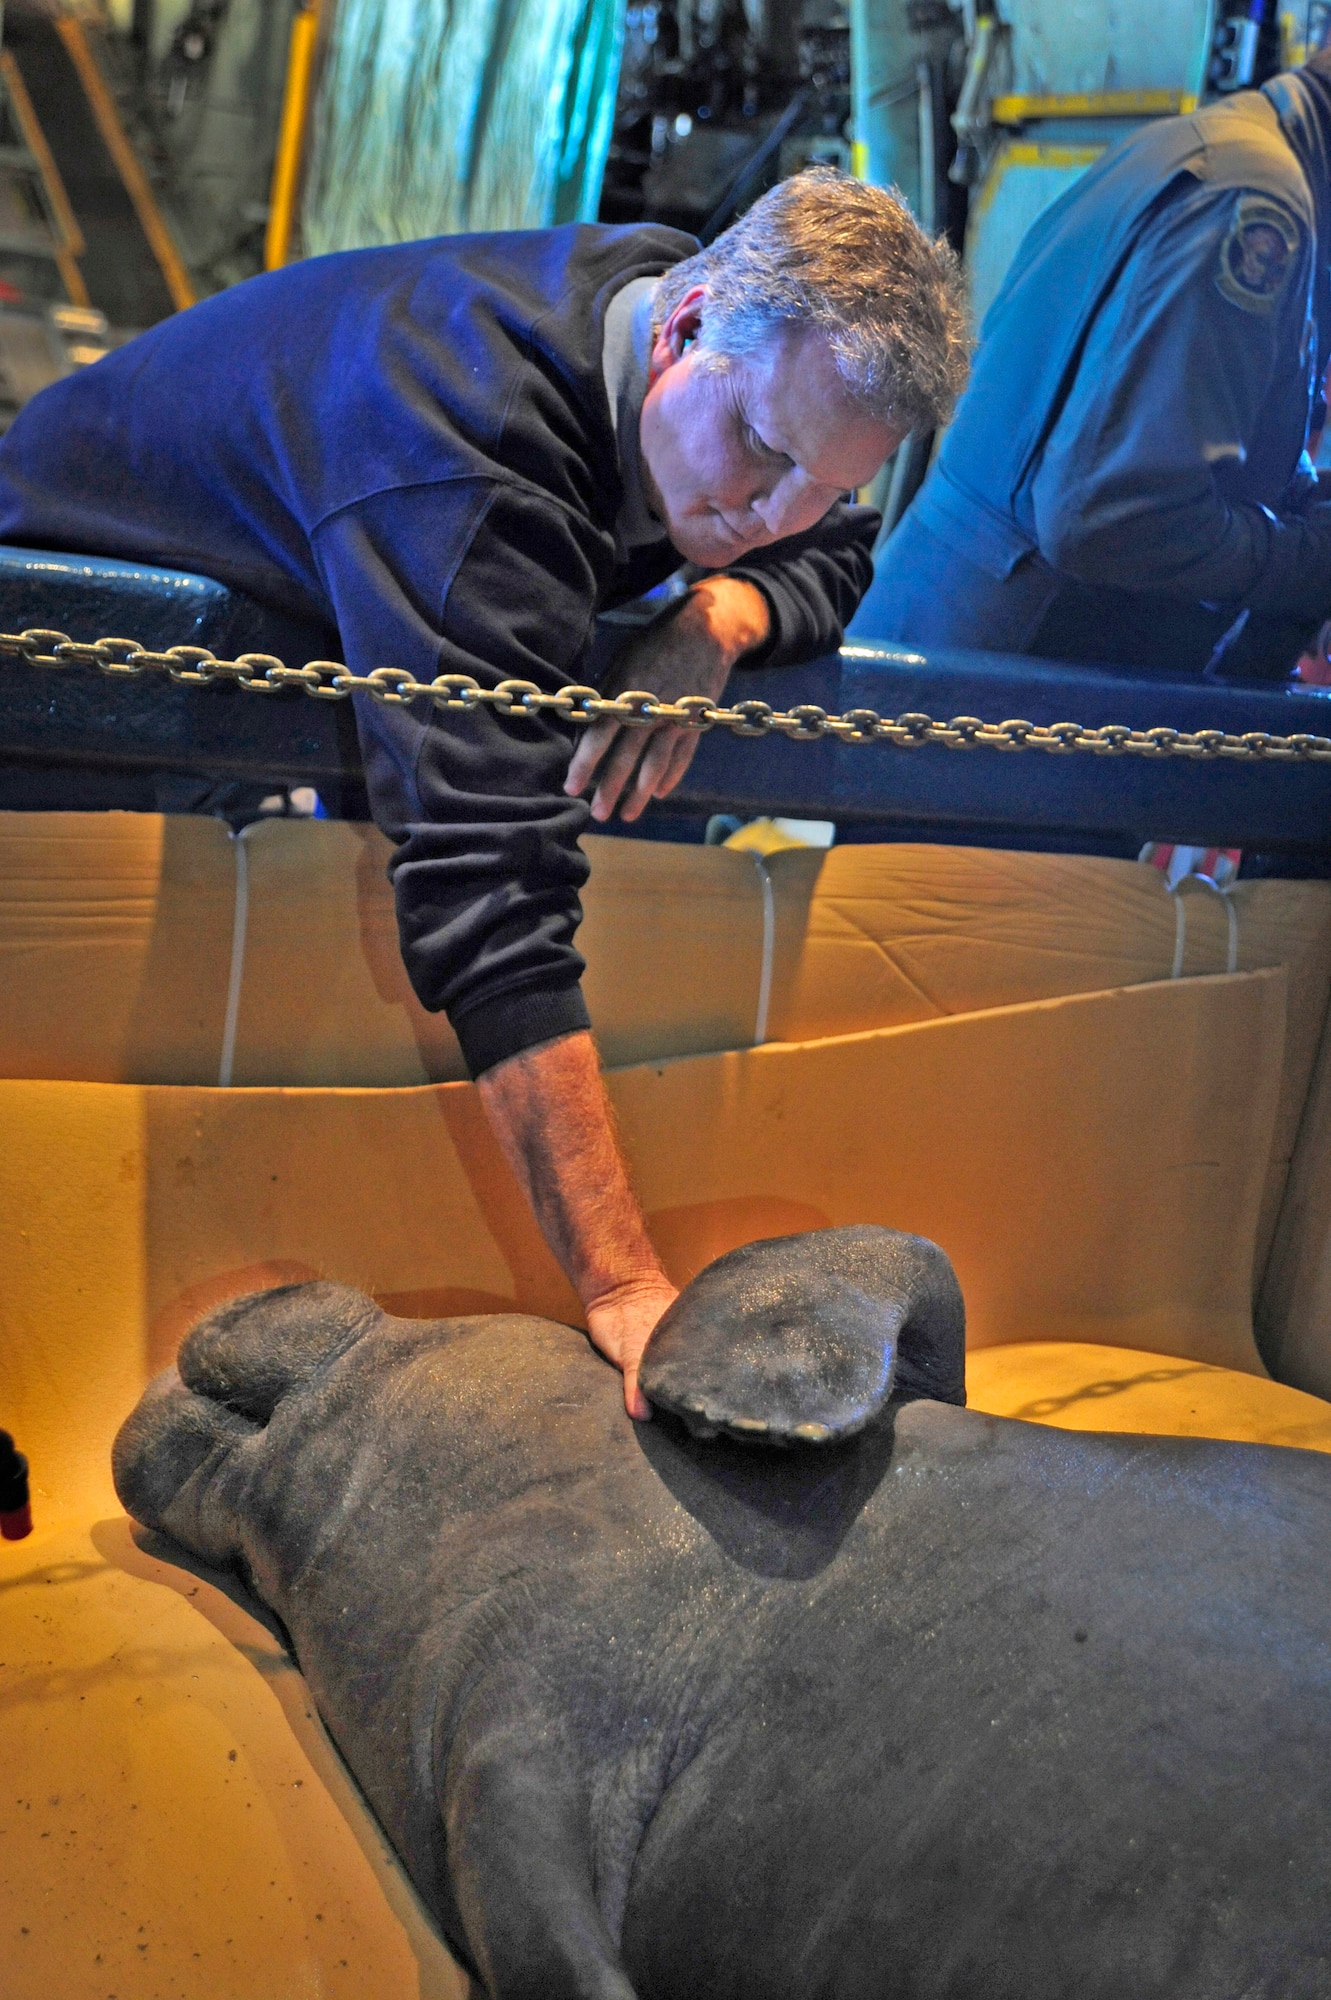 Veterinarian Dr. David Murphy comforts a wounded manatee after a four and a half hour flight from MacDill Air Force Base, Fla., to San Juan, Puerto Rico, aboard a C-130 Hercules from the Puerto Rico Air National Guard’s 156th Airlift Wing.  The manatee was being transported to its new home in the Puerto Rico Zoo. (U.S. Air Force photo/Staff Sgt. Angela Ruiz)